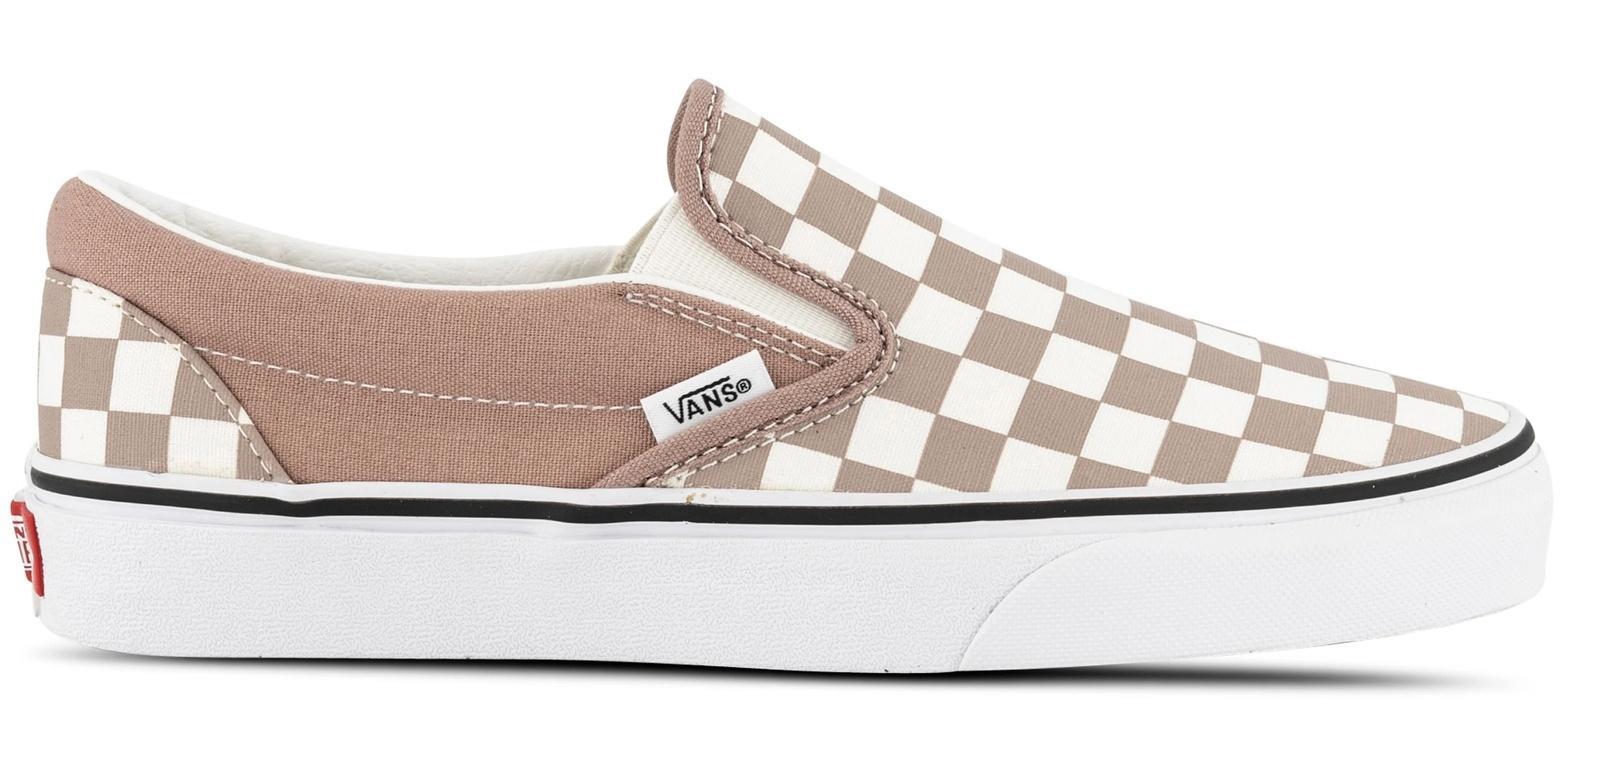 Vans Classic Slip On Canvas Sneaker Shoes Chess Check - Etherea/True White - US 10